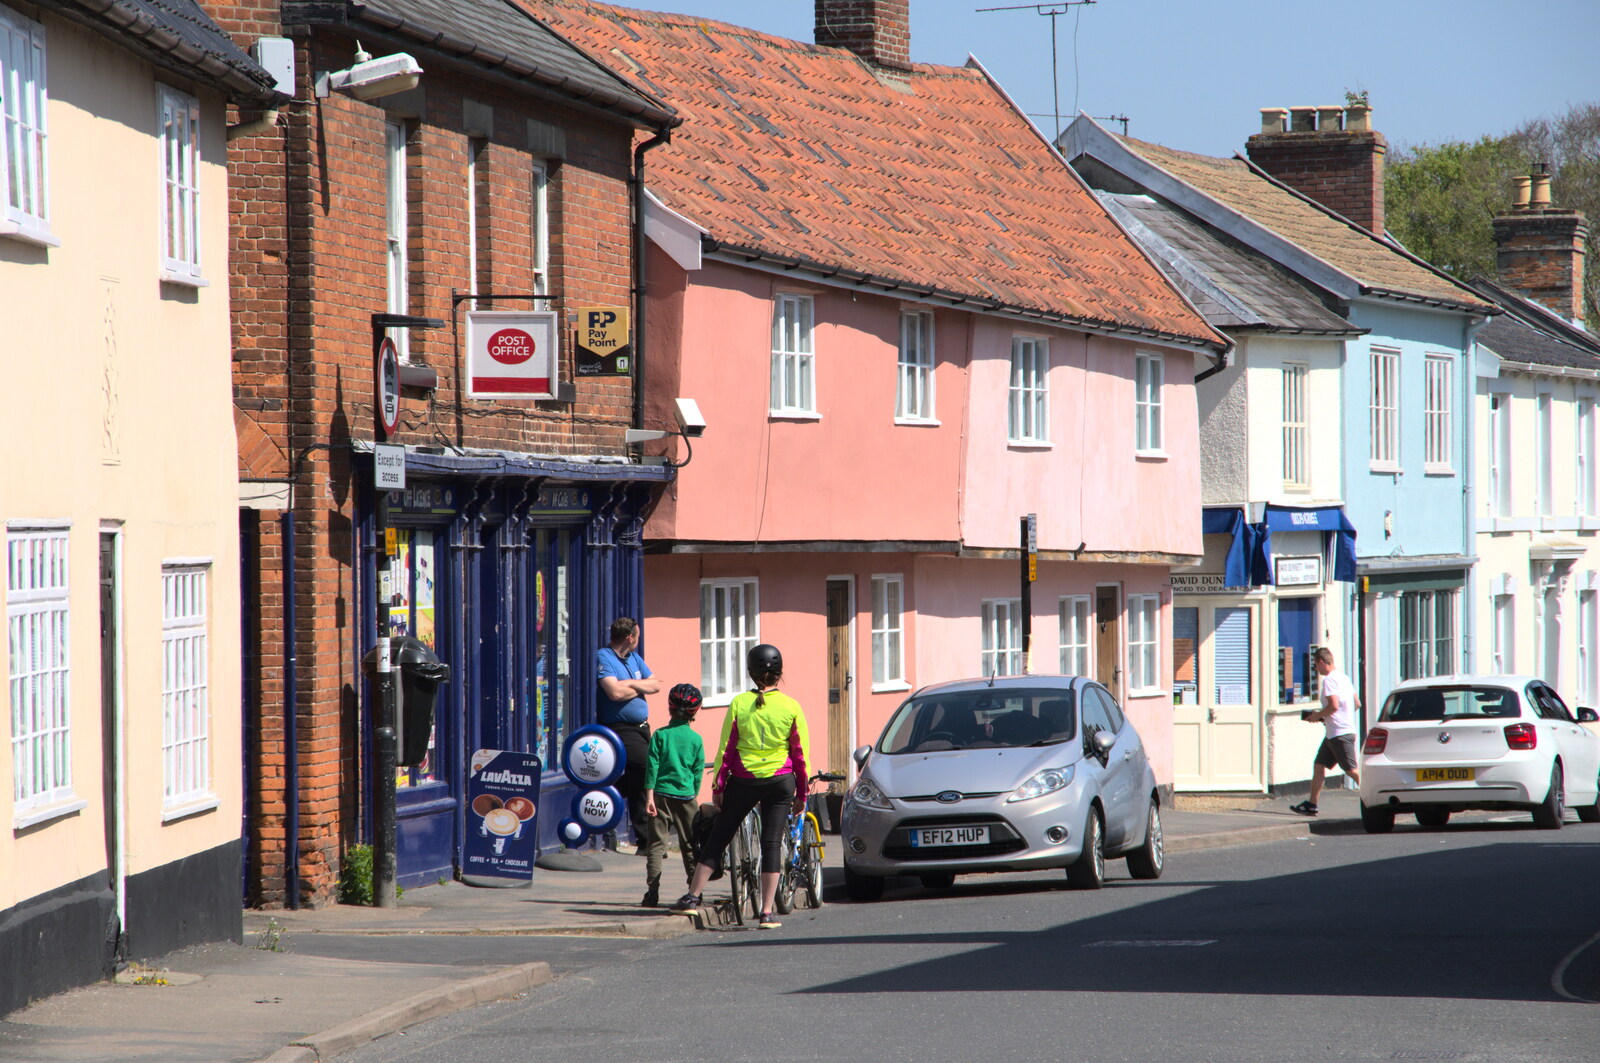 Isobel waits outside the Blue McColl's Shop from Lost Cat and a Walk on Nick's Lane, Brome, Suffolk - 26th April 2020